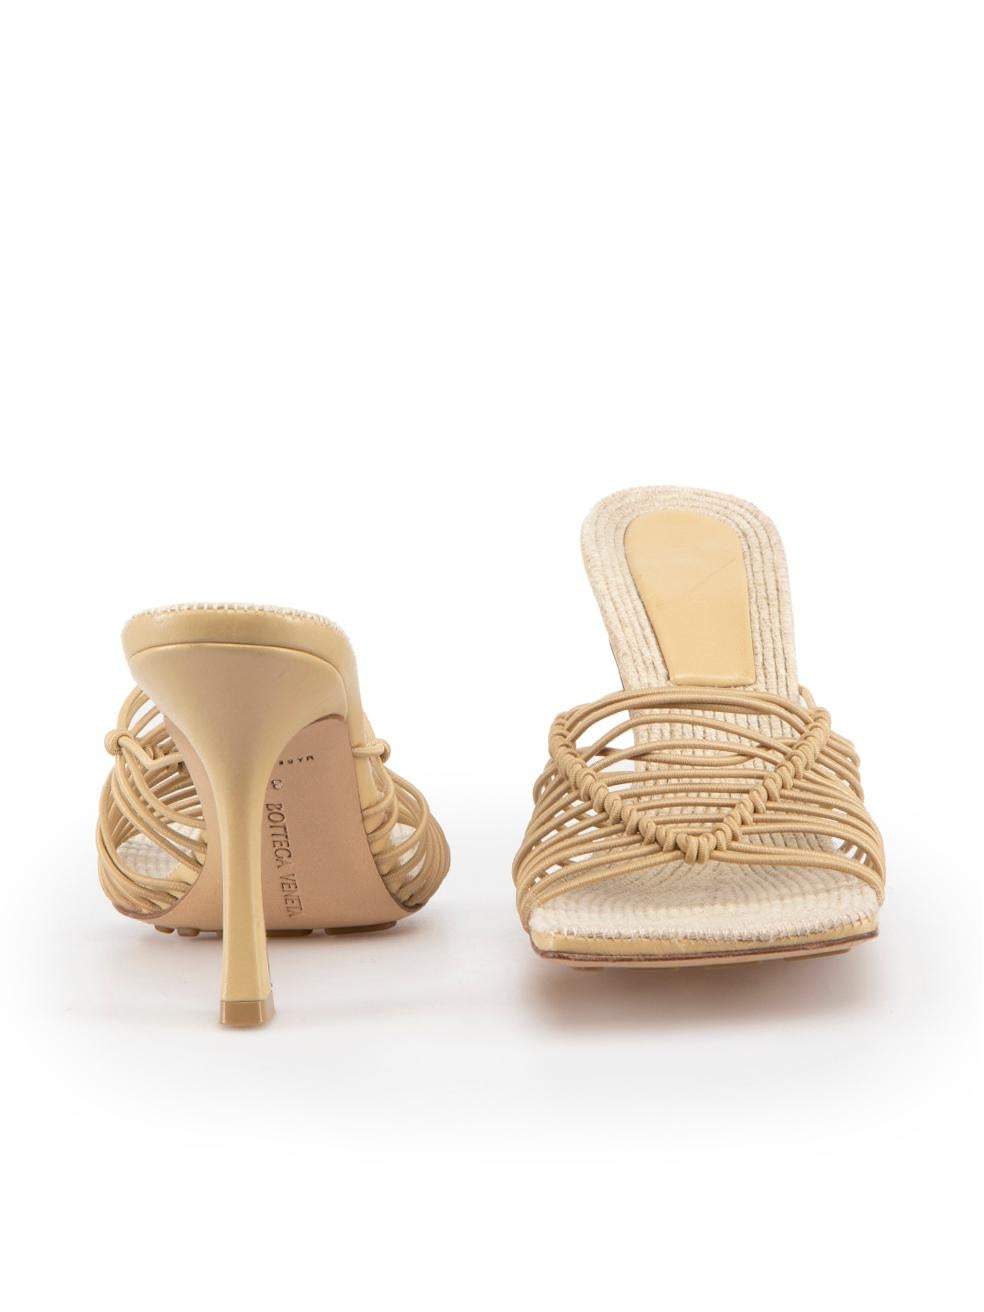 Bottega Veneta Beige Rope Accent Mule Sandals Size IT 37 In Good Condition For Sale In London, GB